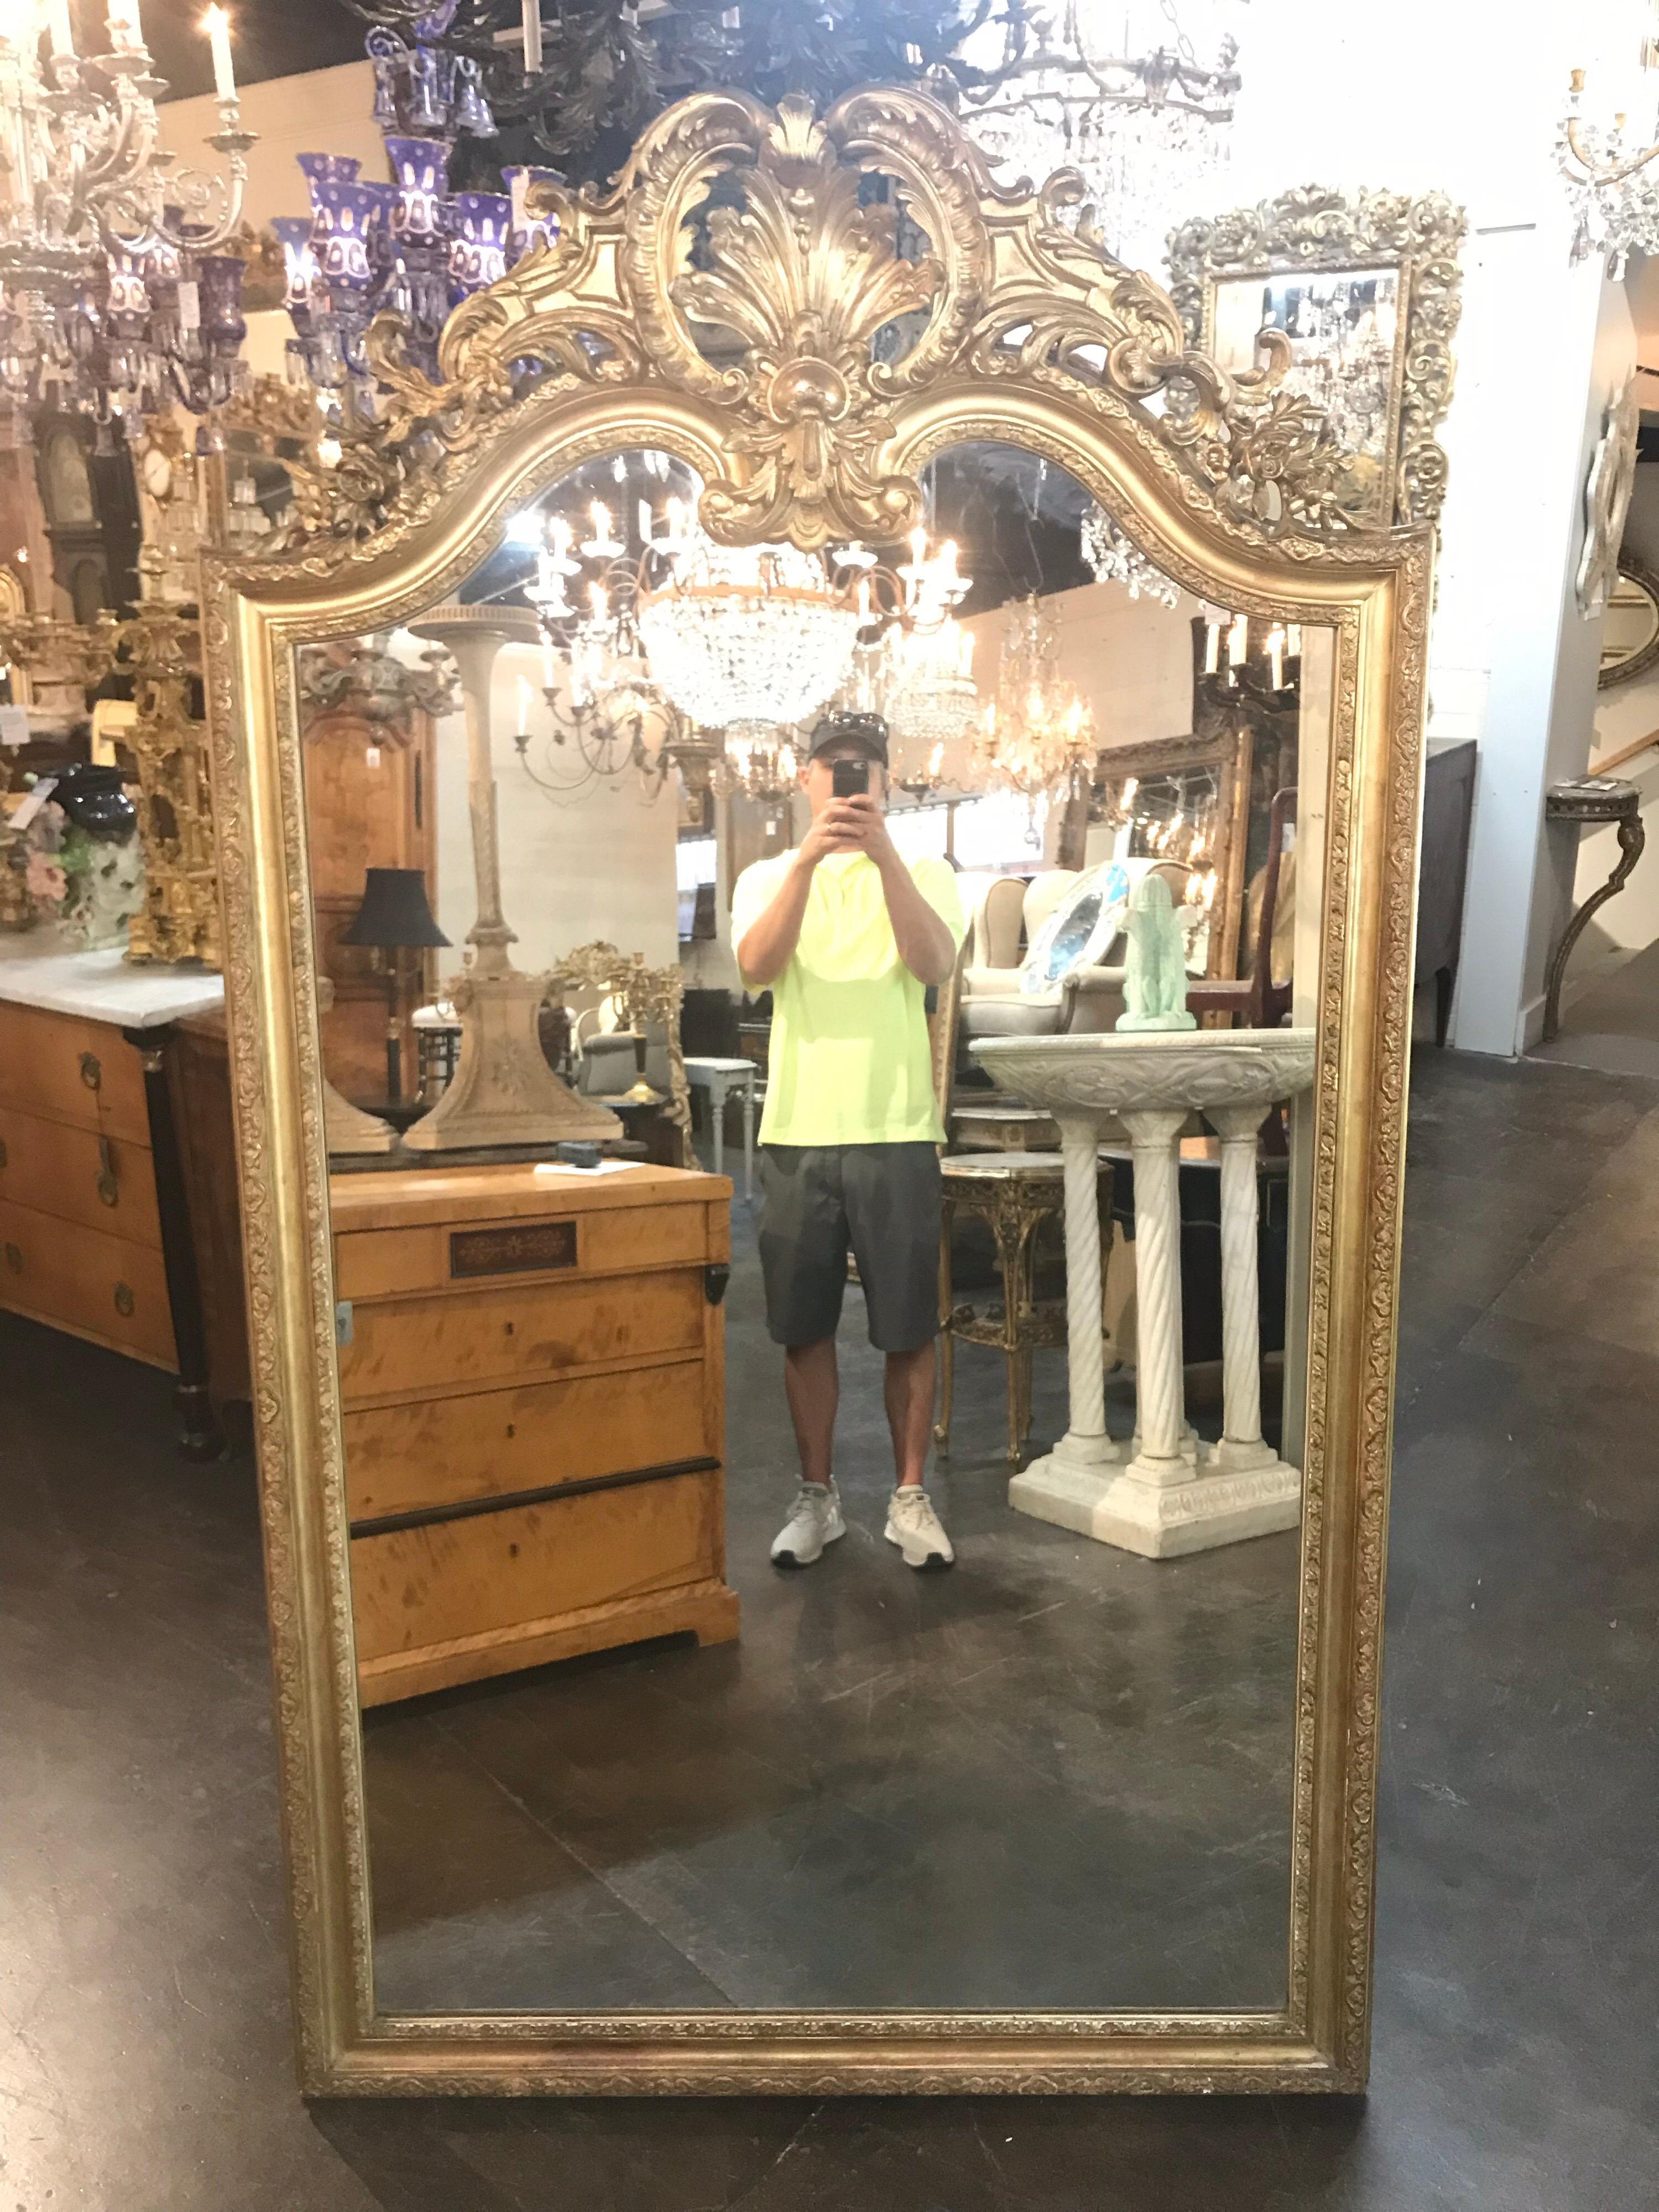 Very fine French Louis XVI Style giltwood mirror. With carved crest and exceptional gilding. Ready to make a statement in a fine home. Please reach out with any questions.